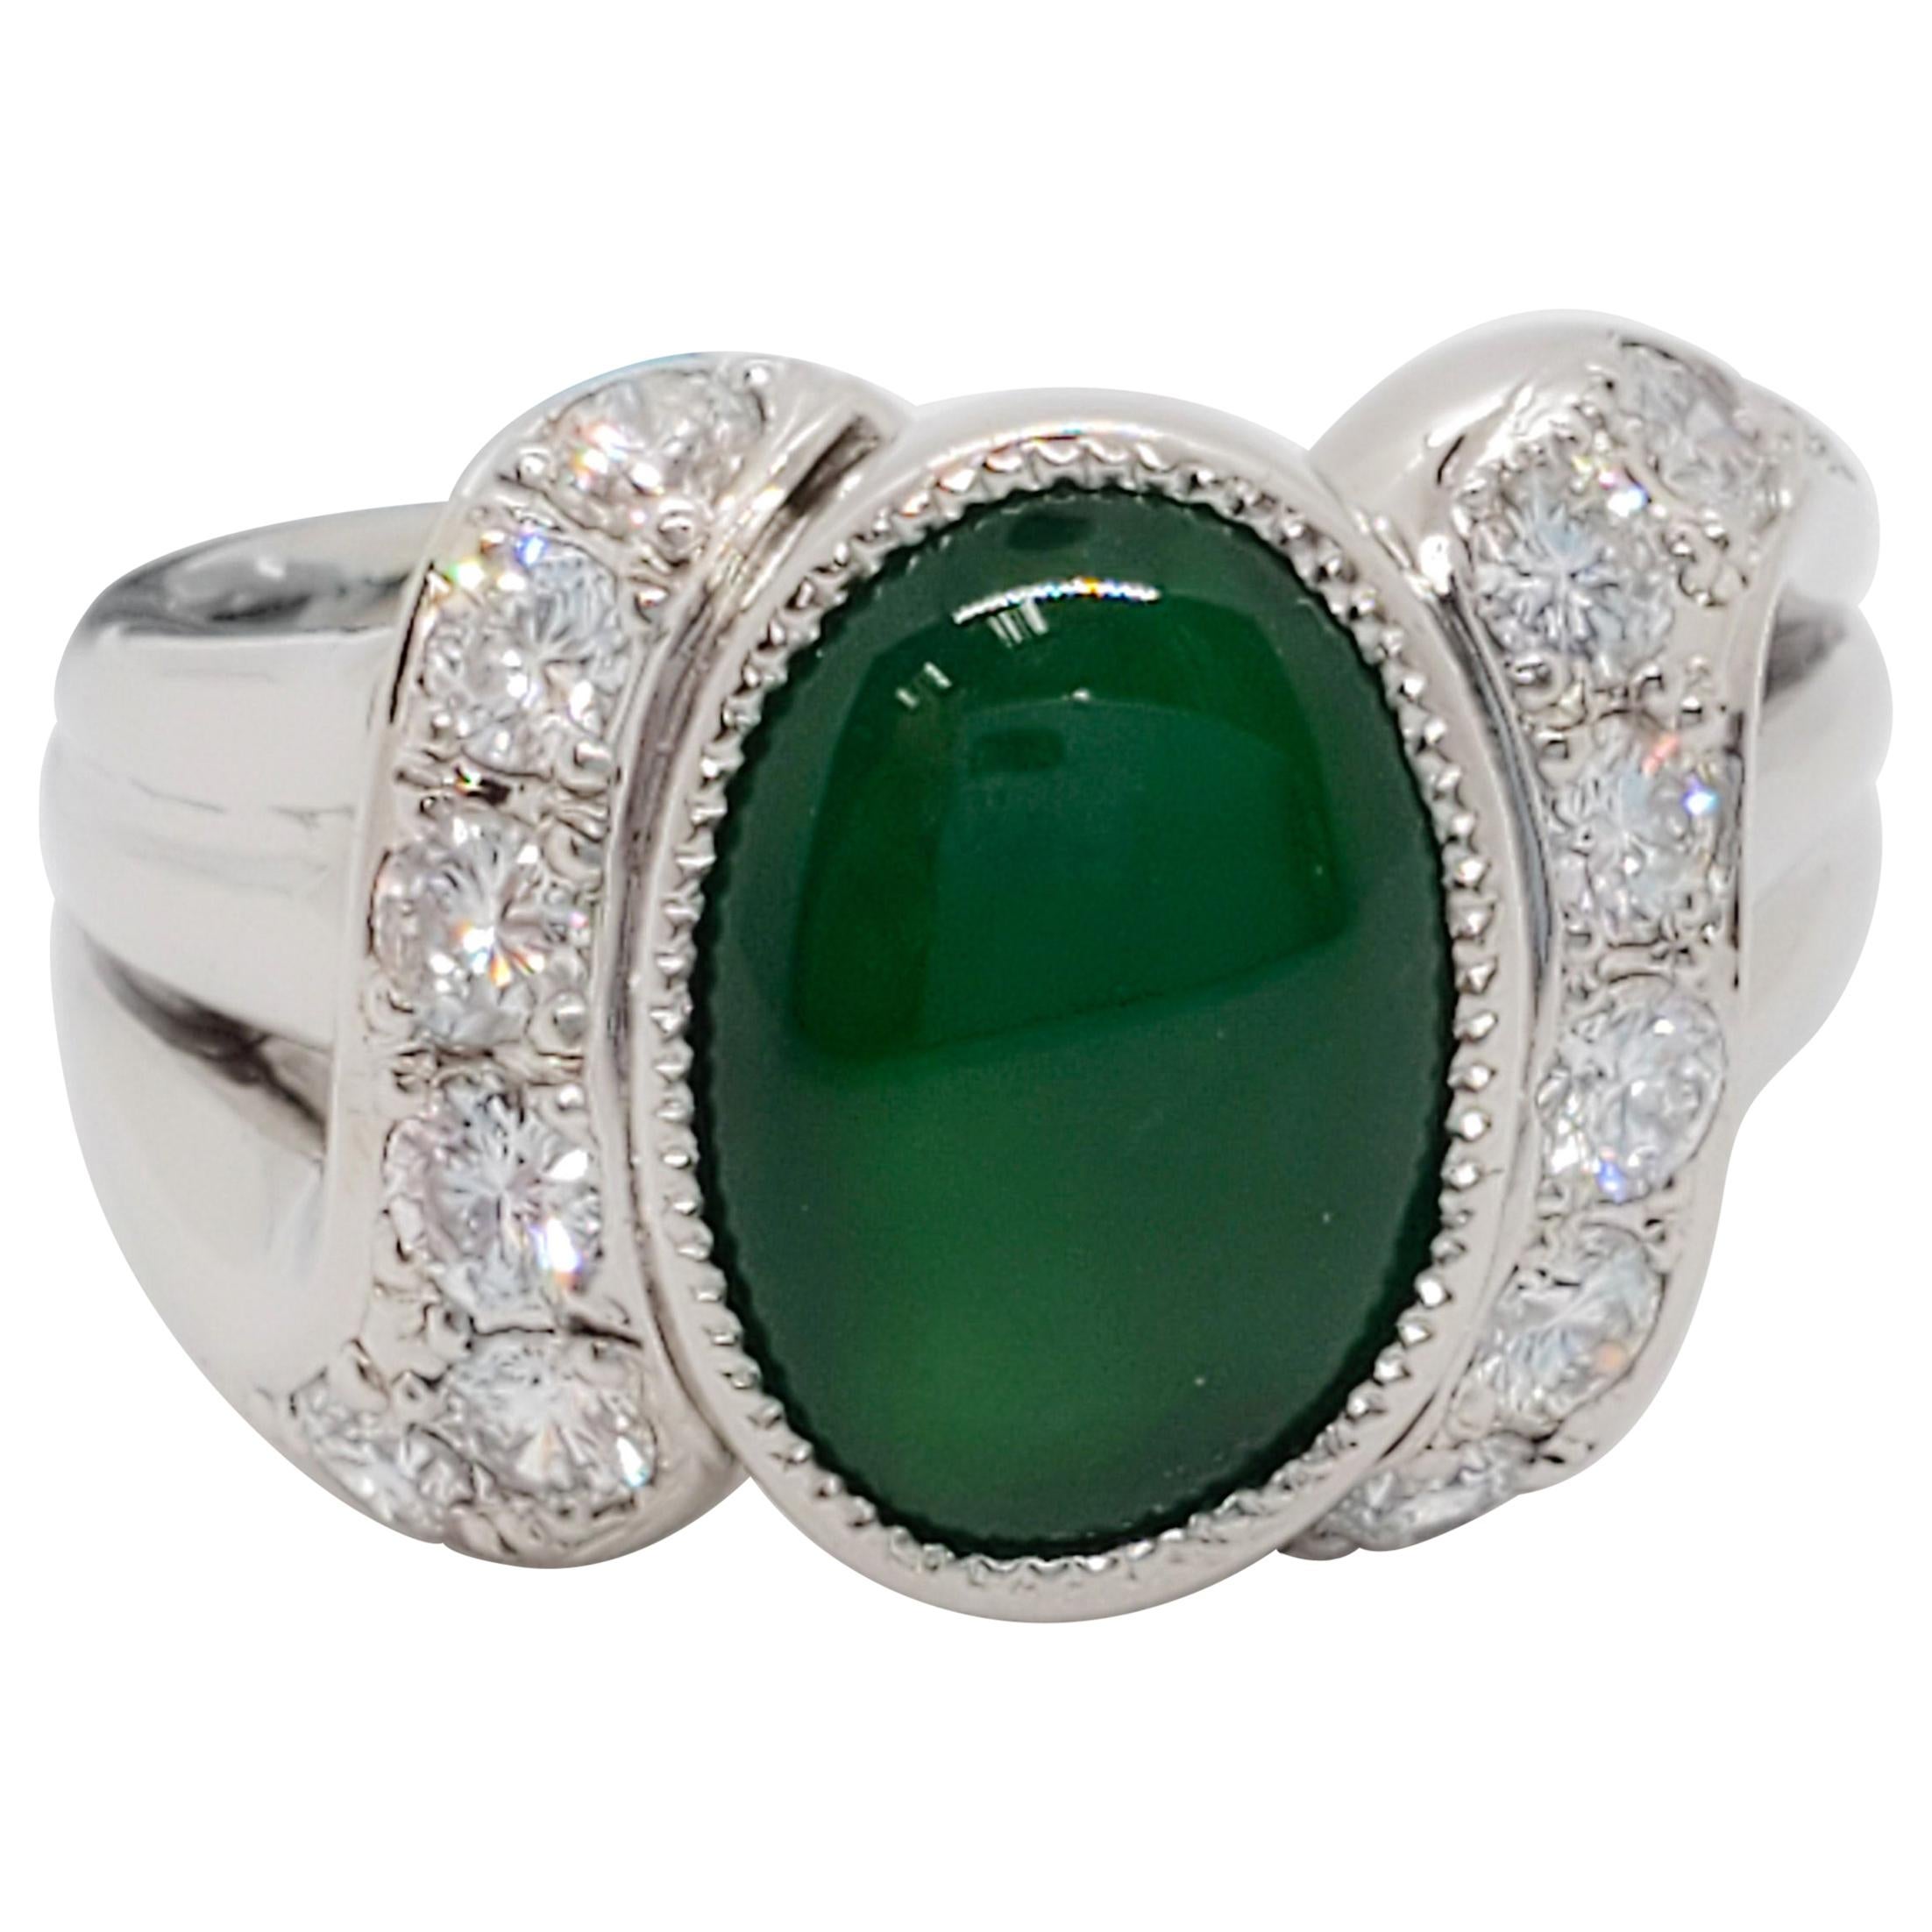 Green Jade Oval Cabochon and White Diamond Round Cocktail Ring in Platinum